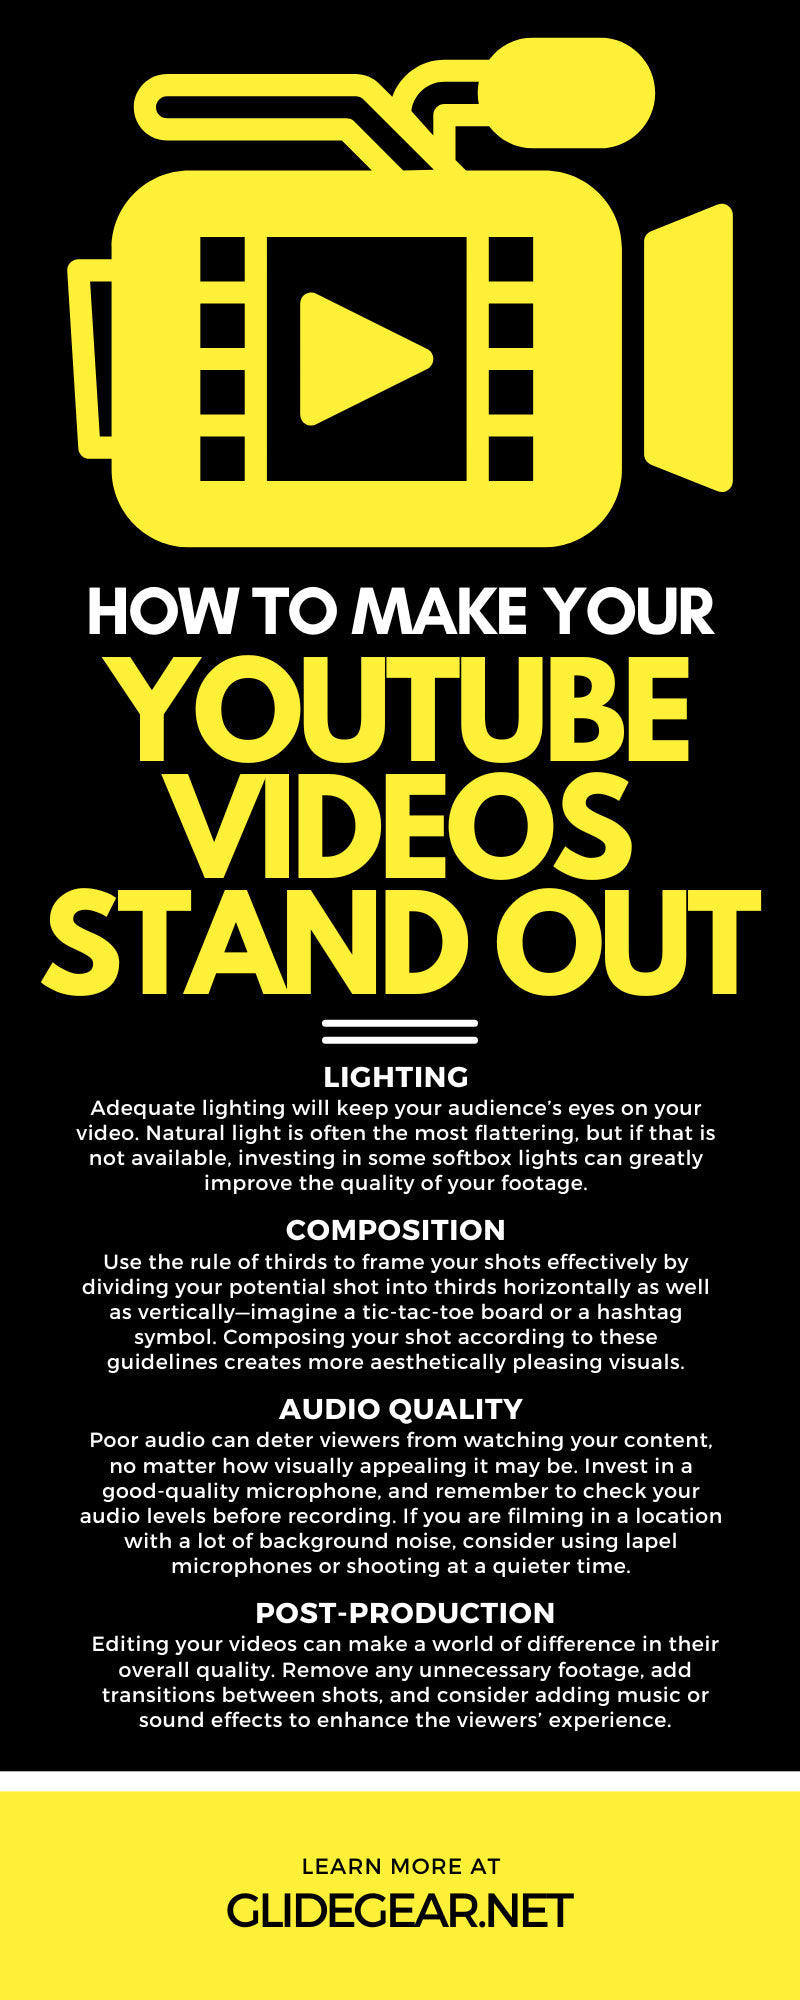 How To Make Your YouTube Videos Stand Out